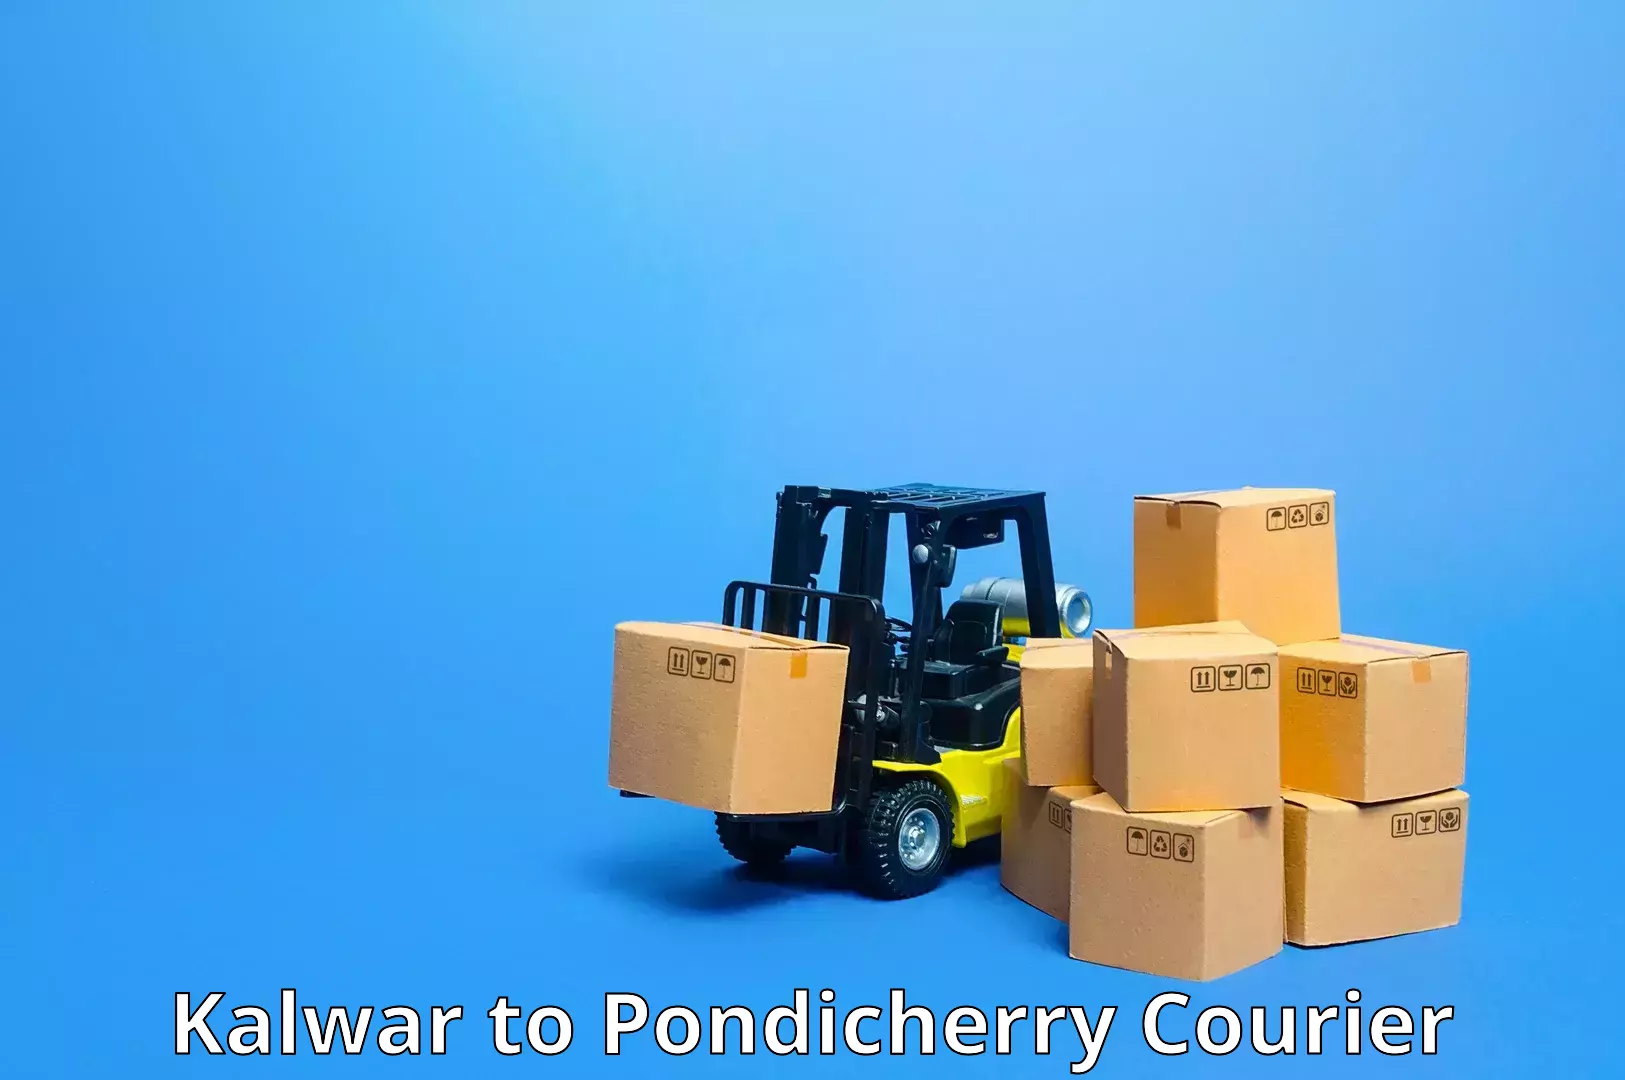 Subscription-based courier Kalwar to Pondicherry